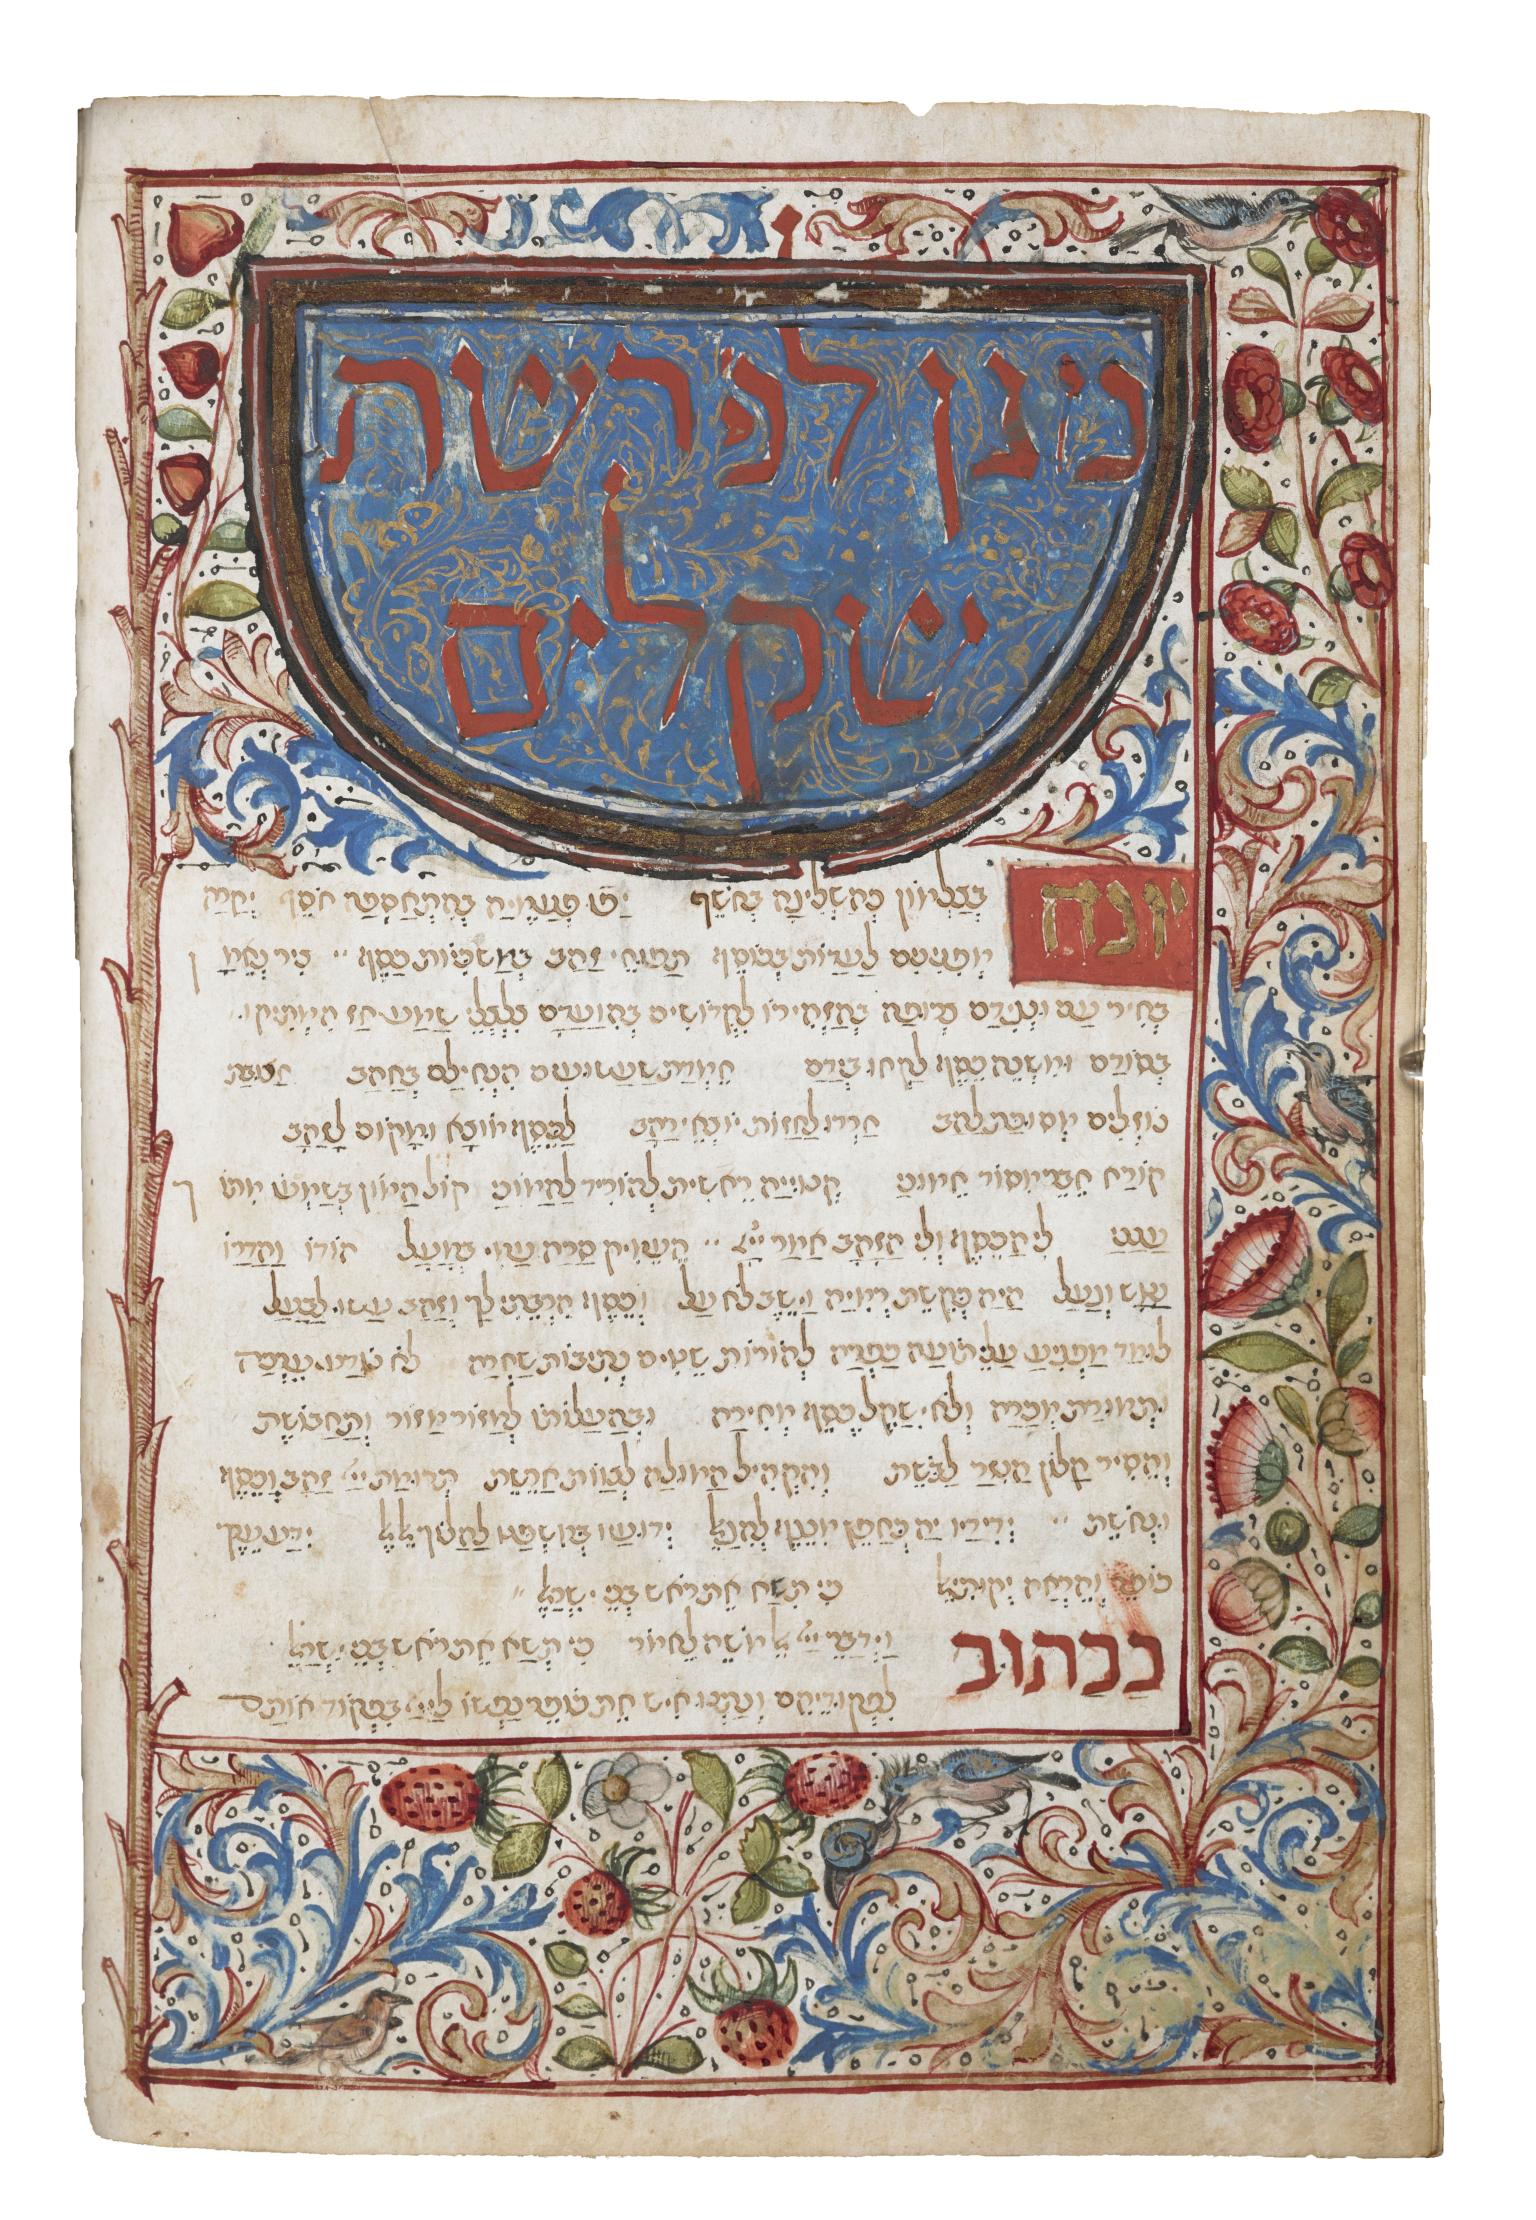 Manuscript page with Hebrew text, with some words set apart in rectangular frames, surrounded by border of branches, flowers, and birds, and small illustration of boy and animal with tail in bottom margin. 